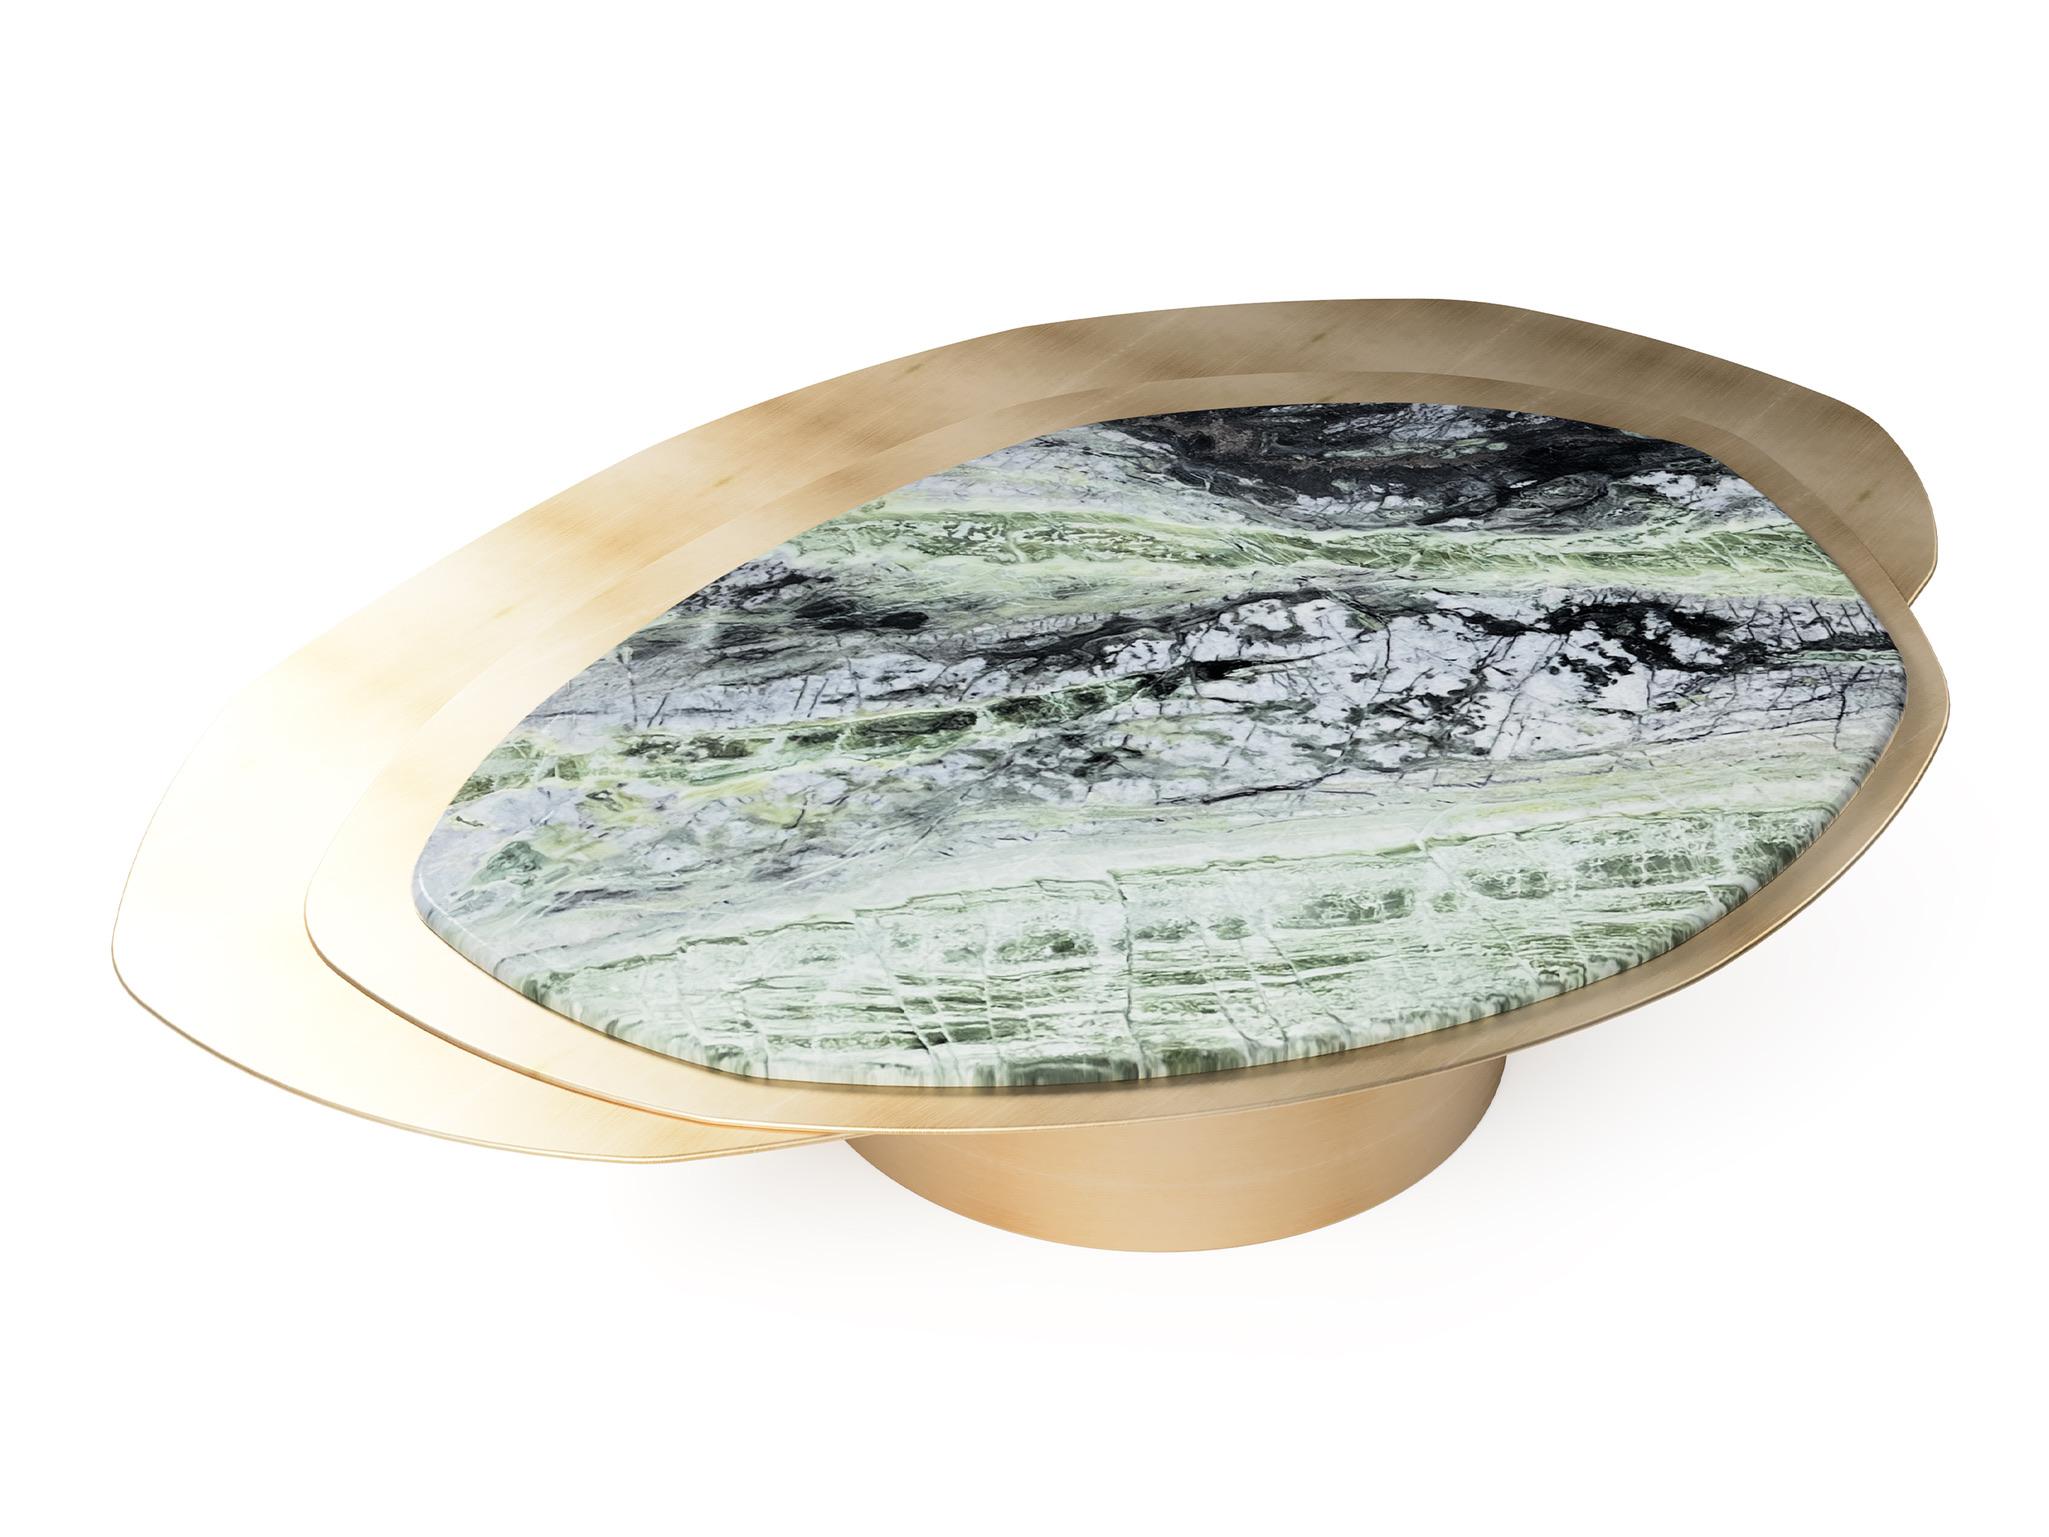 “The Epicure IX” Contemporary Center table ft. Jade River marble and solid brass plates in “Satin” finish

Luxury doesn’t always follow the common patterns. Luxury goes beyond and almost like one of the best gourmets joins varied experiences,